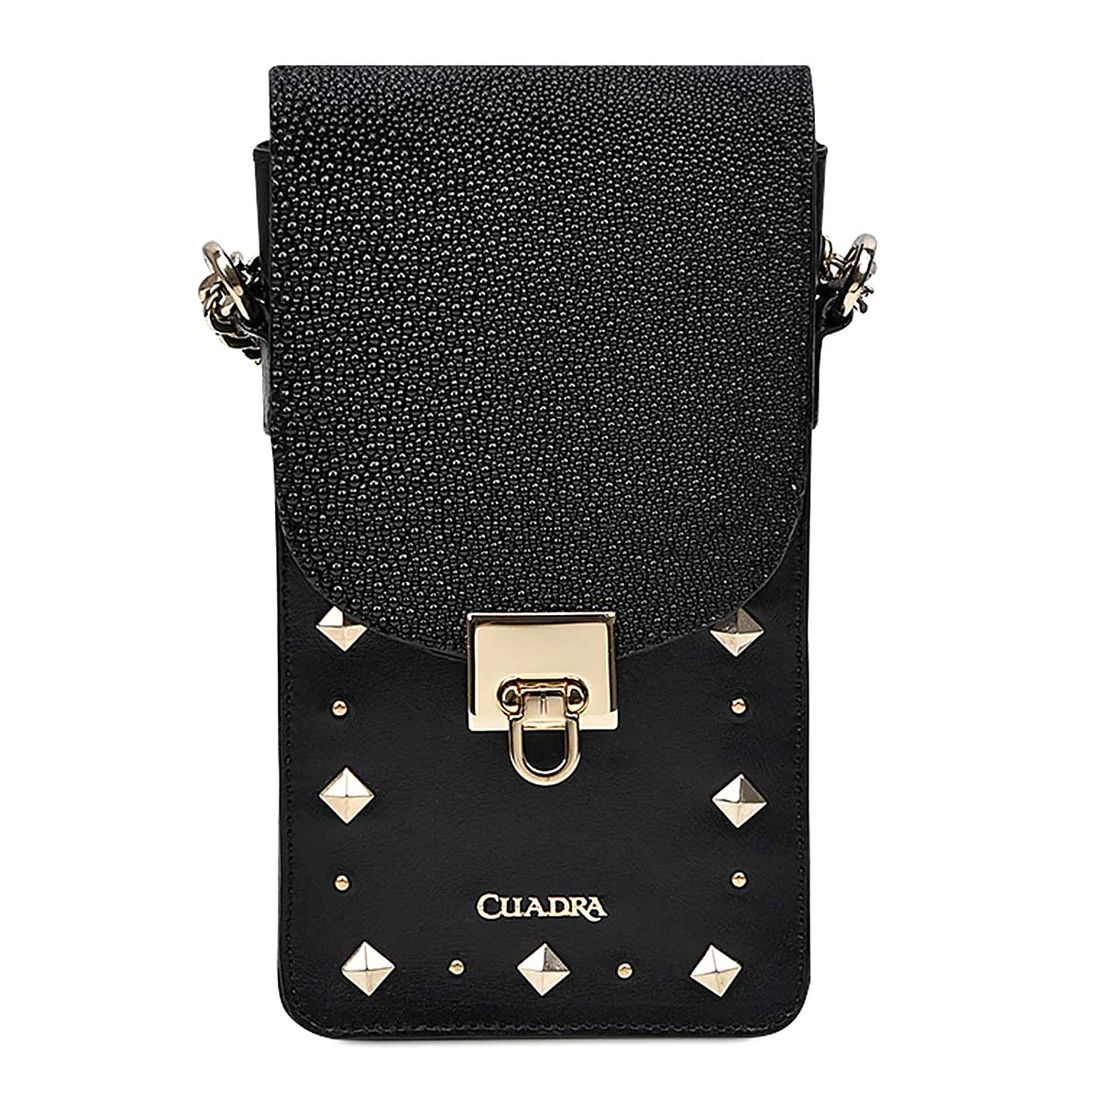 Cuadra | Black Exotic Leather Cell Phone Bag